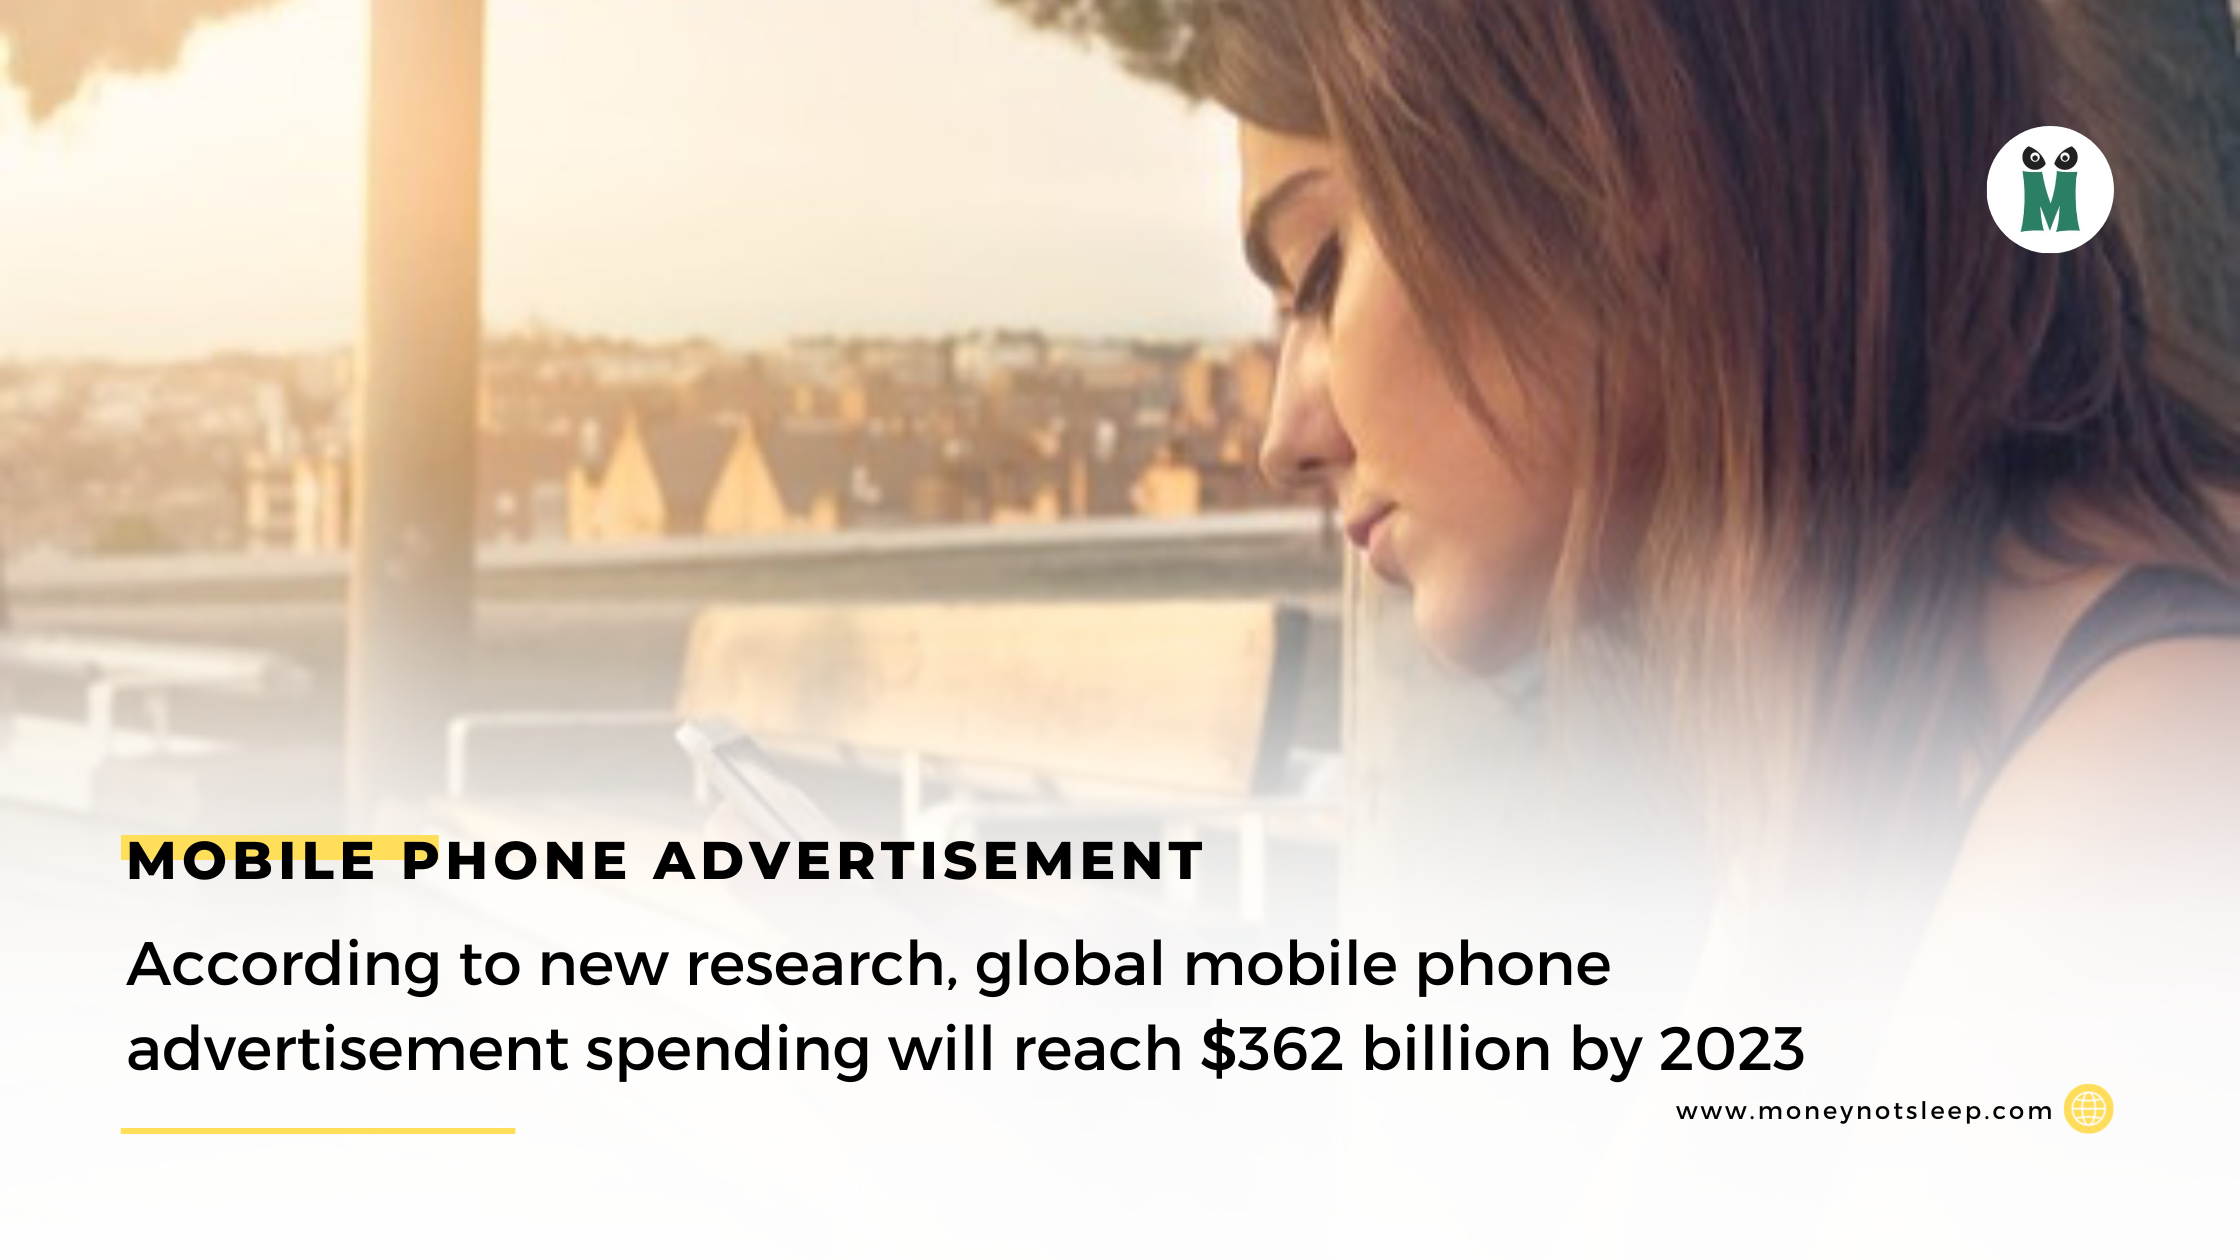 According to new research, global mobile phone advertisement spending will reach $362 billion by 2023